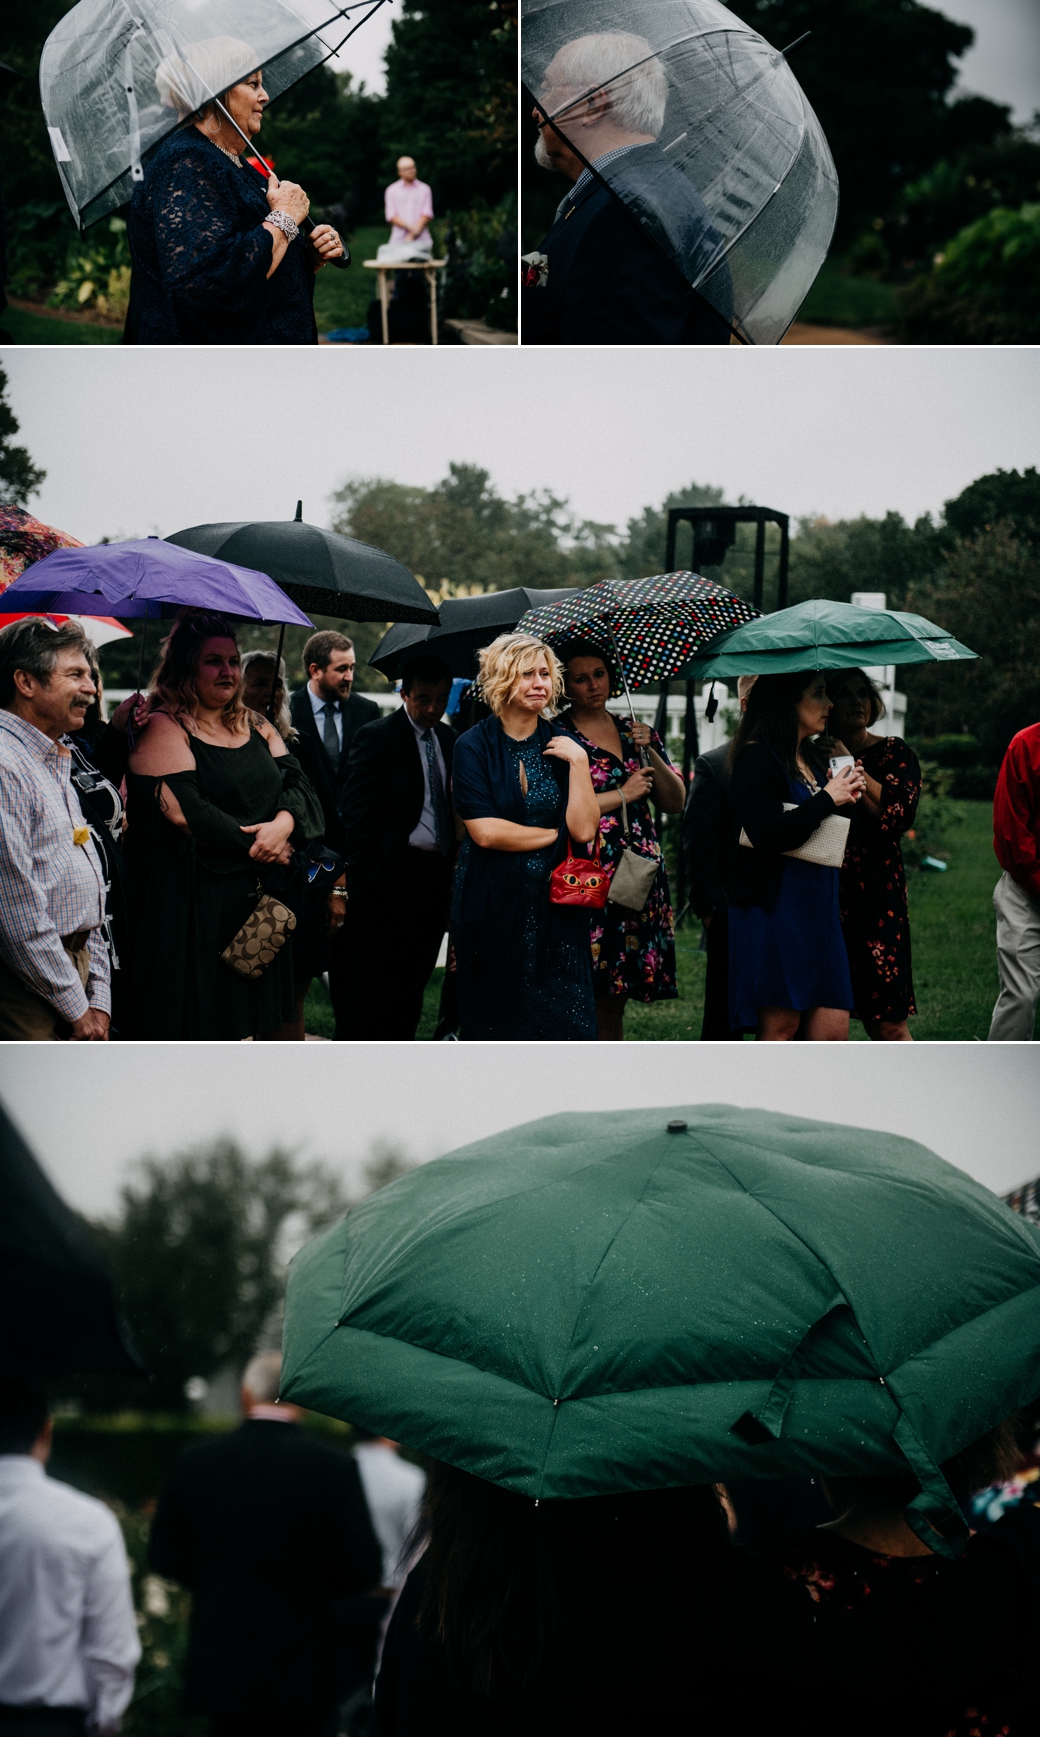 Guests stand under umbrellas at Missouri Botanical Gardens to watch a rainy day wedding ceremony